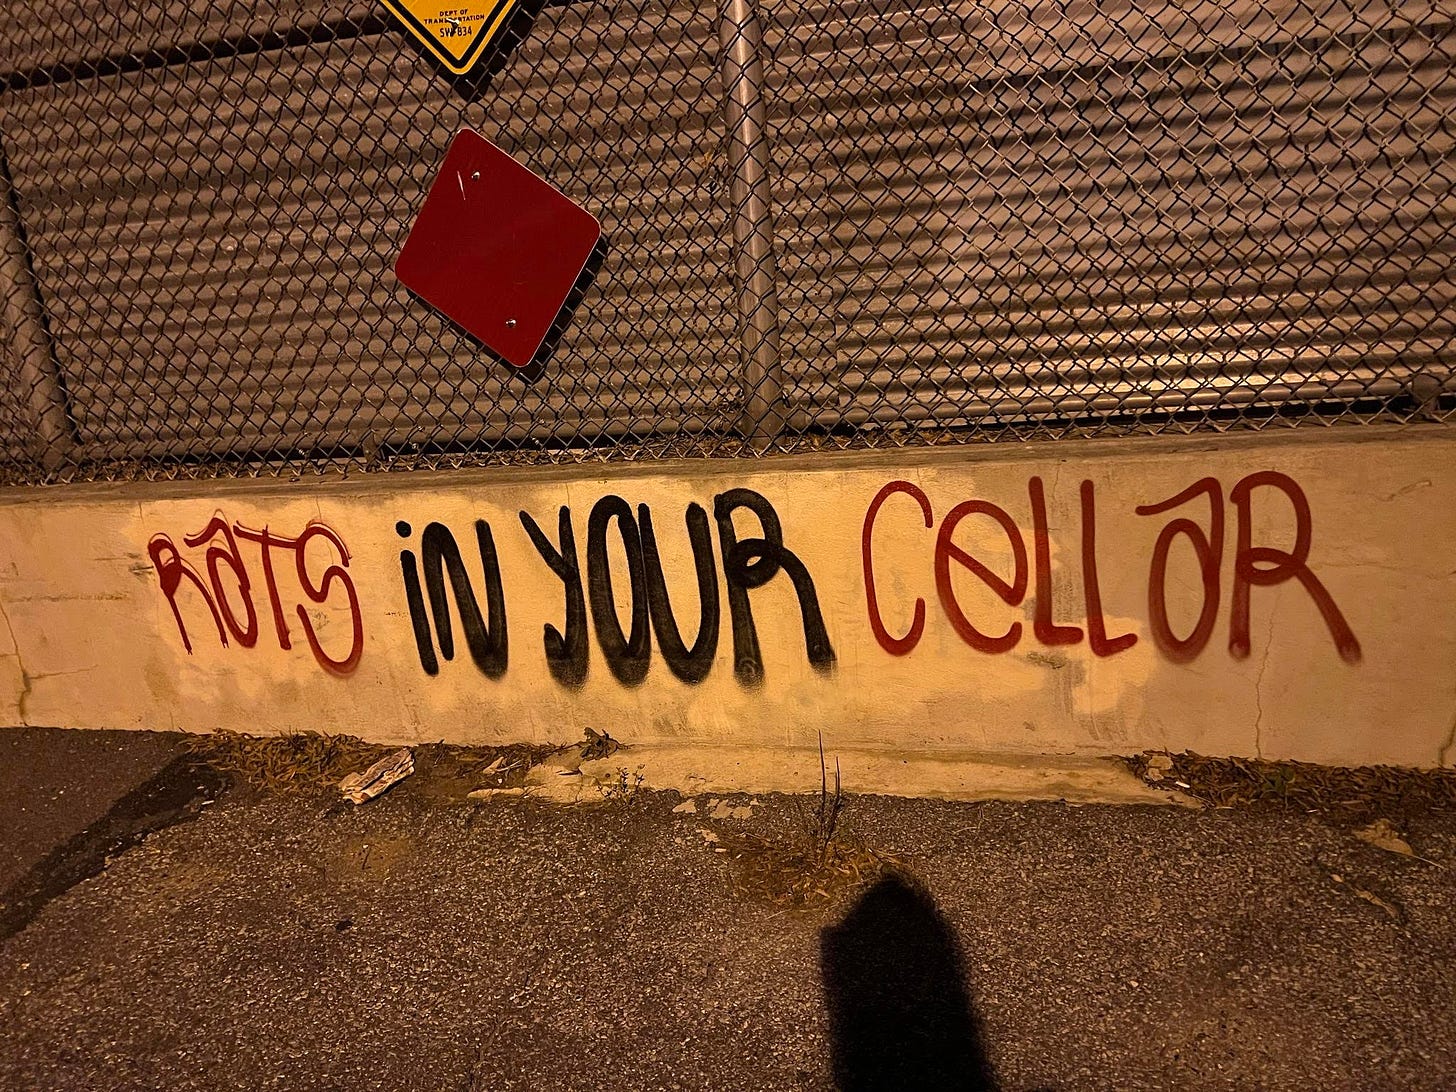 "Rats in your cellar" tagged on a low cement wall.